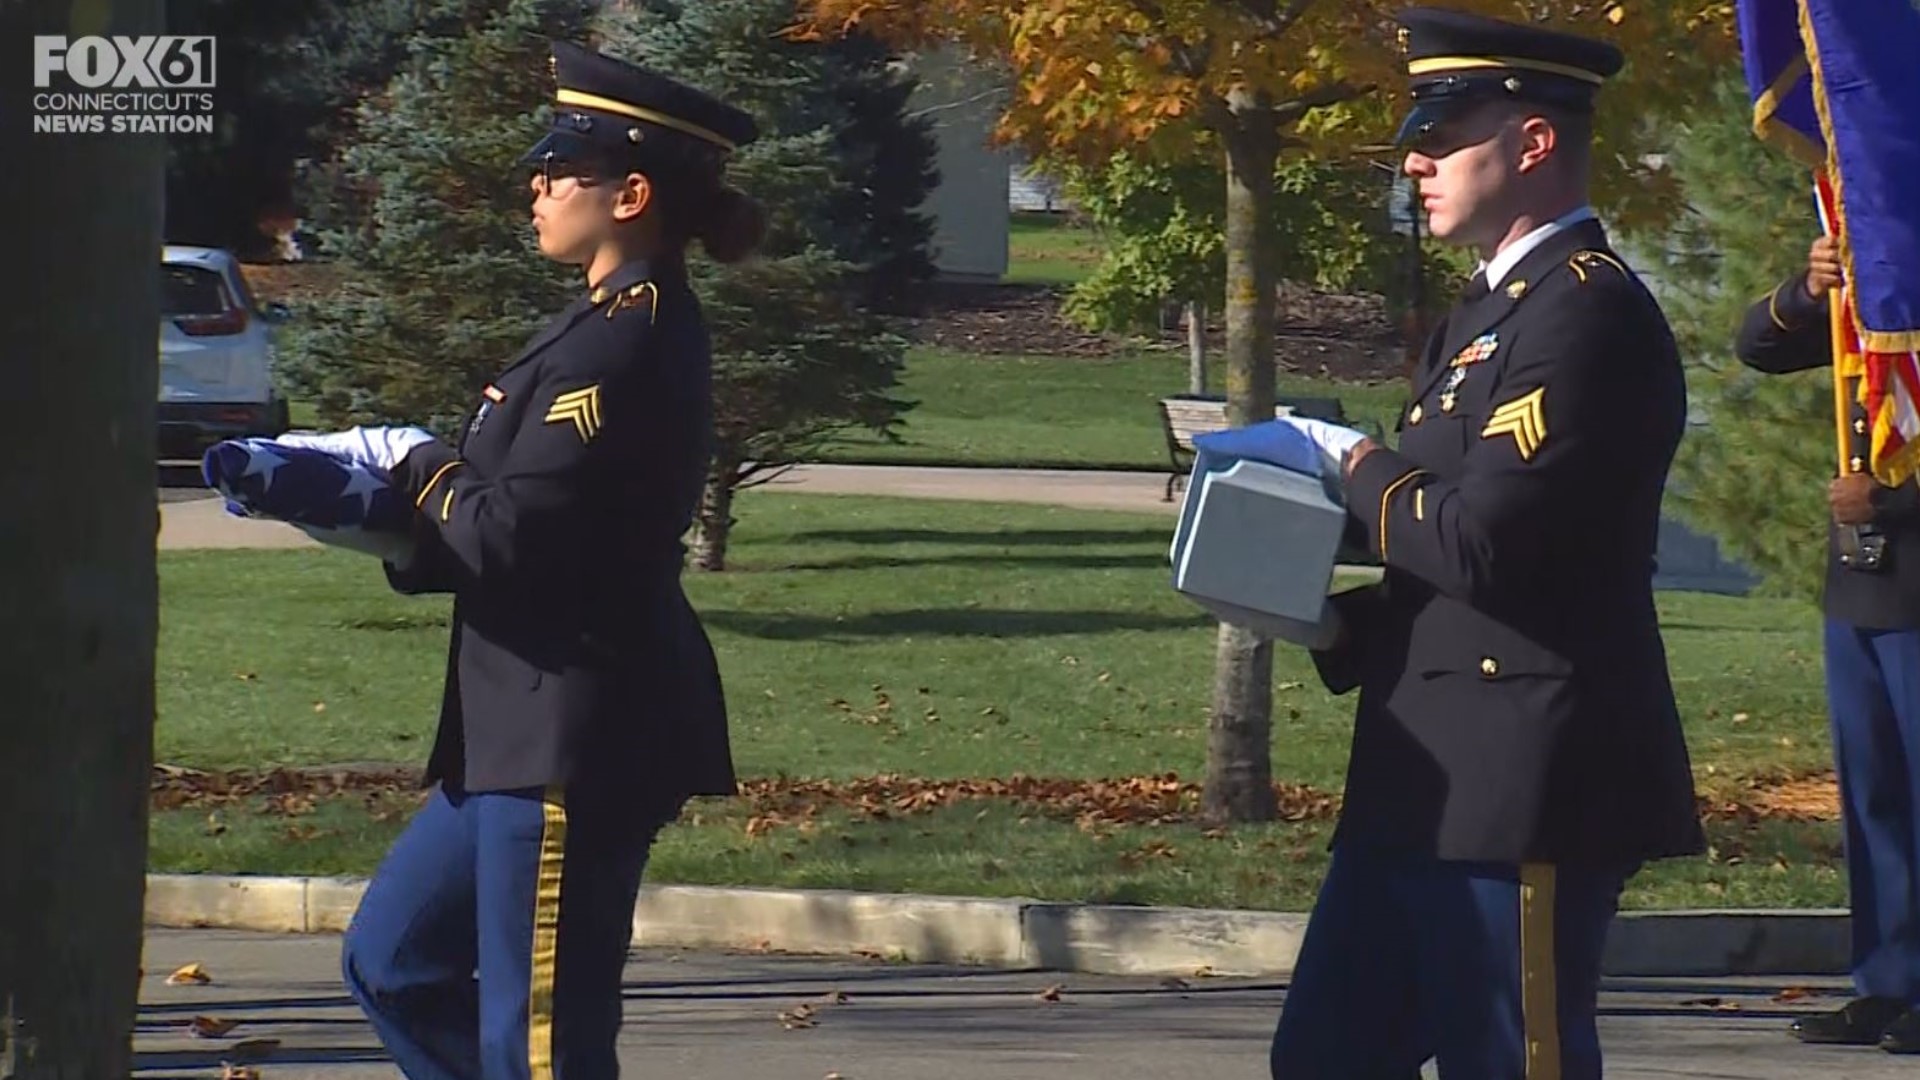 The unclaimed remains of six veterans were laid to rest in Middletown after procession and ceremony.